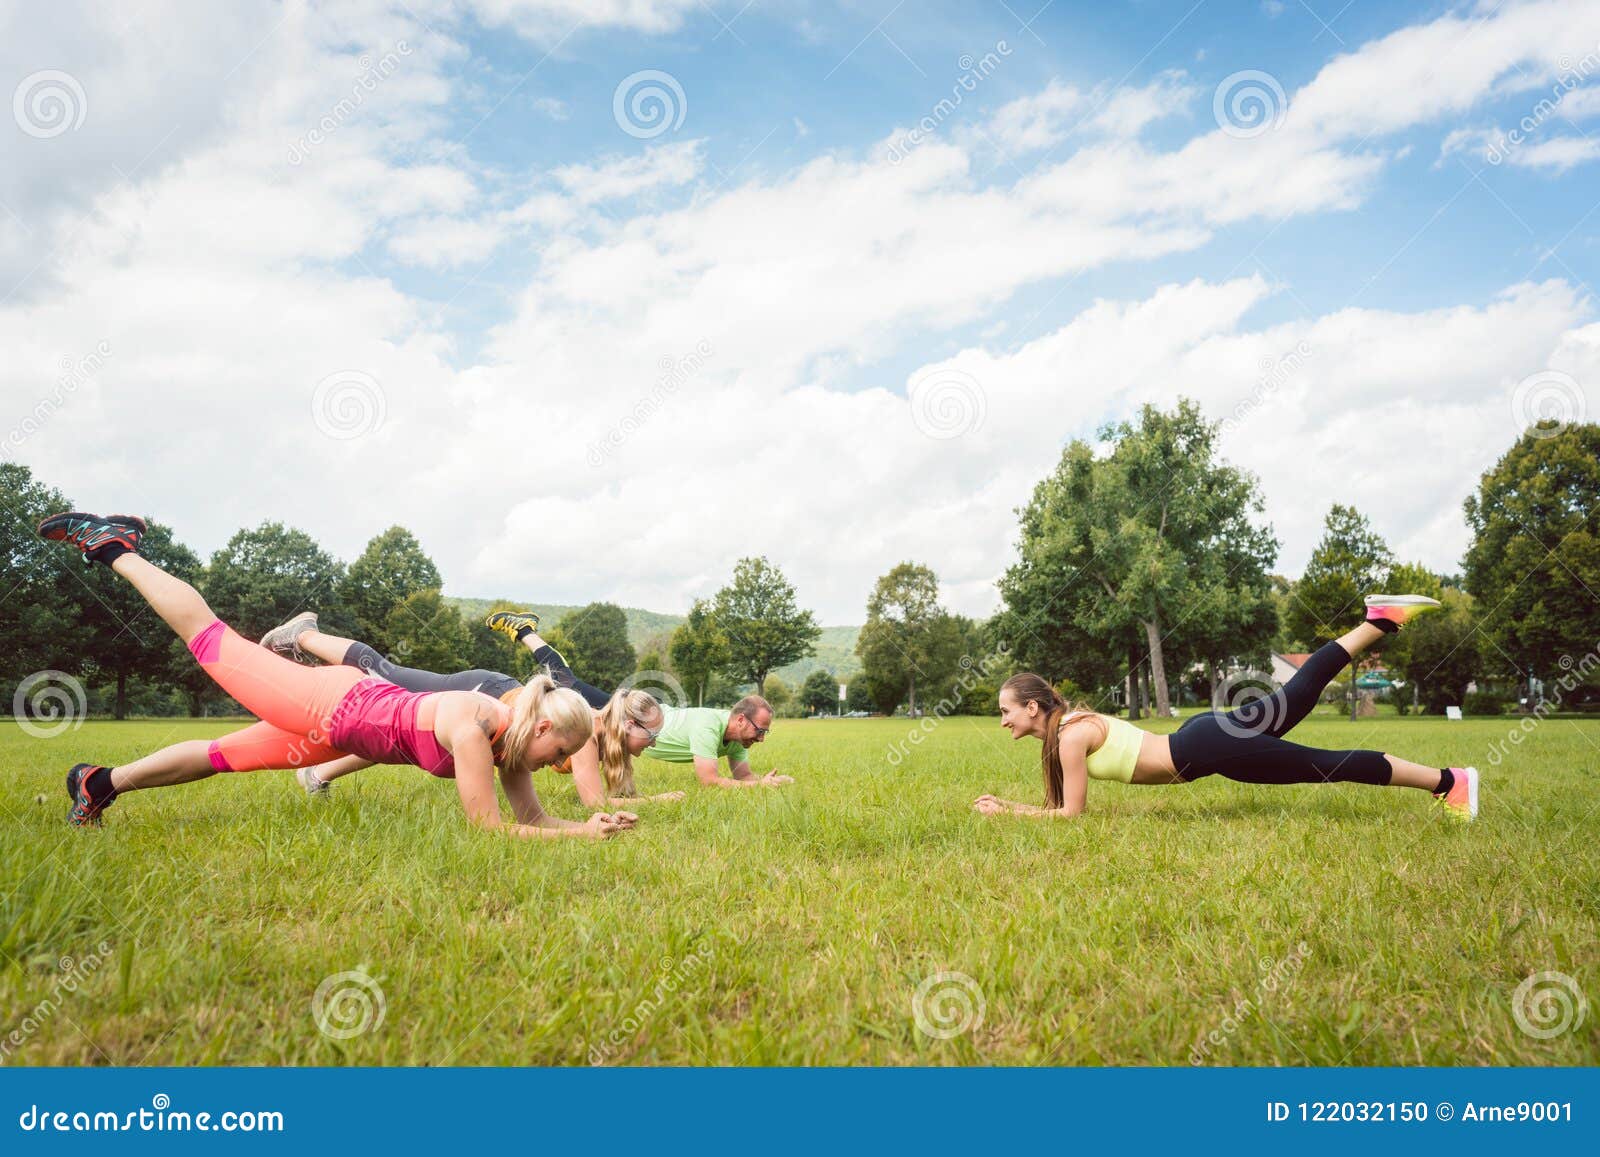 family planking outdoors in meadow with fitness teacher